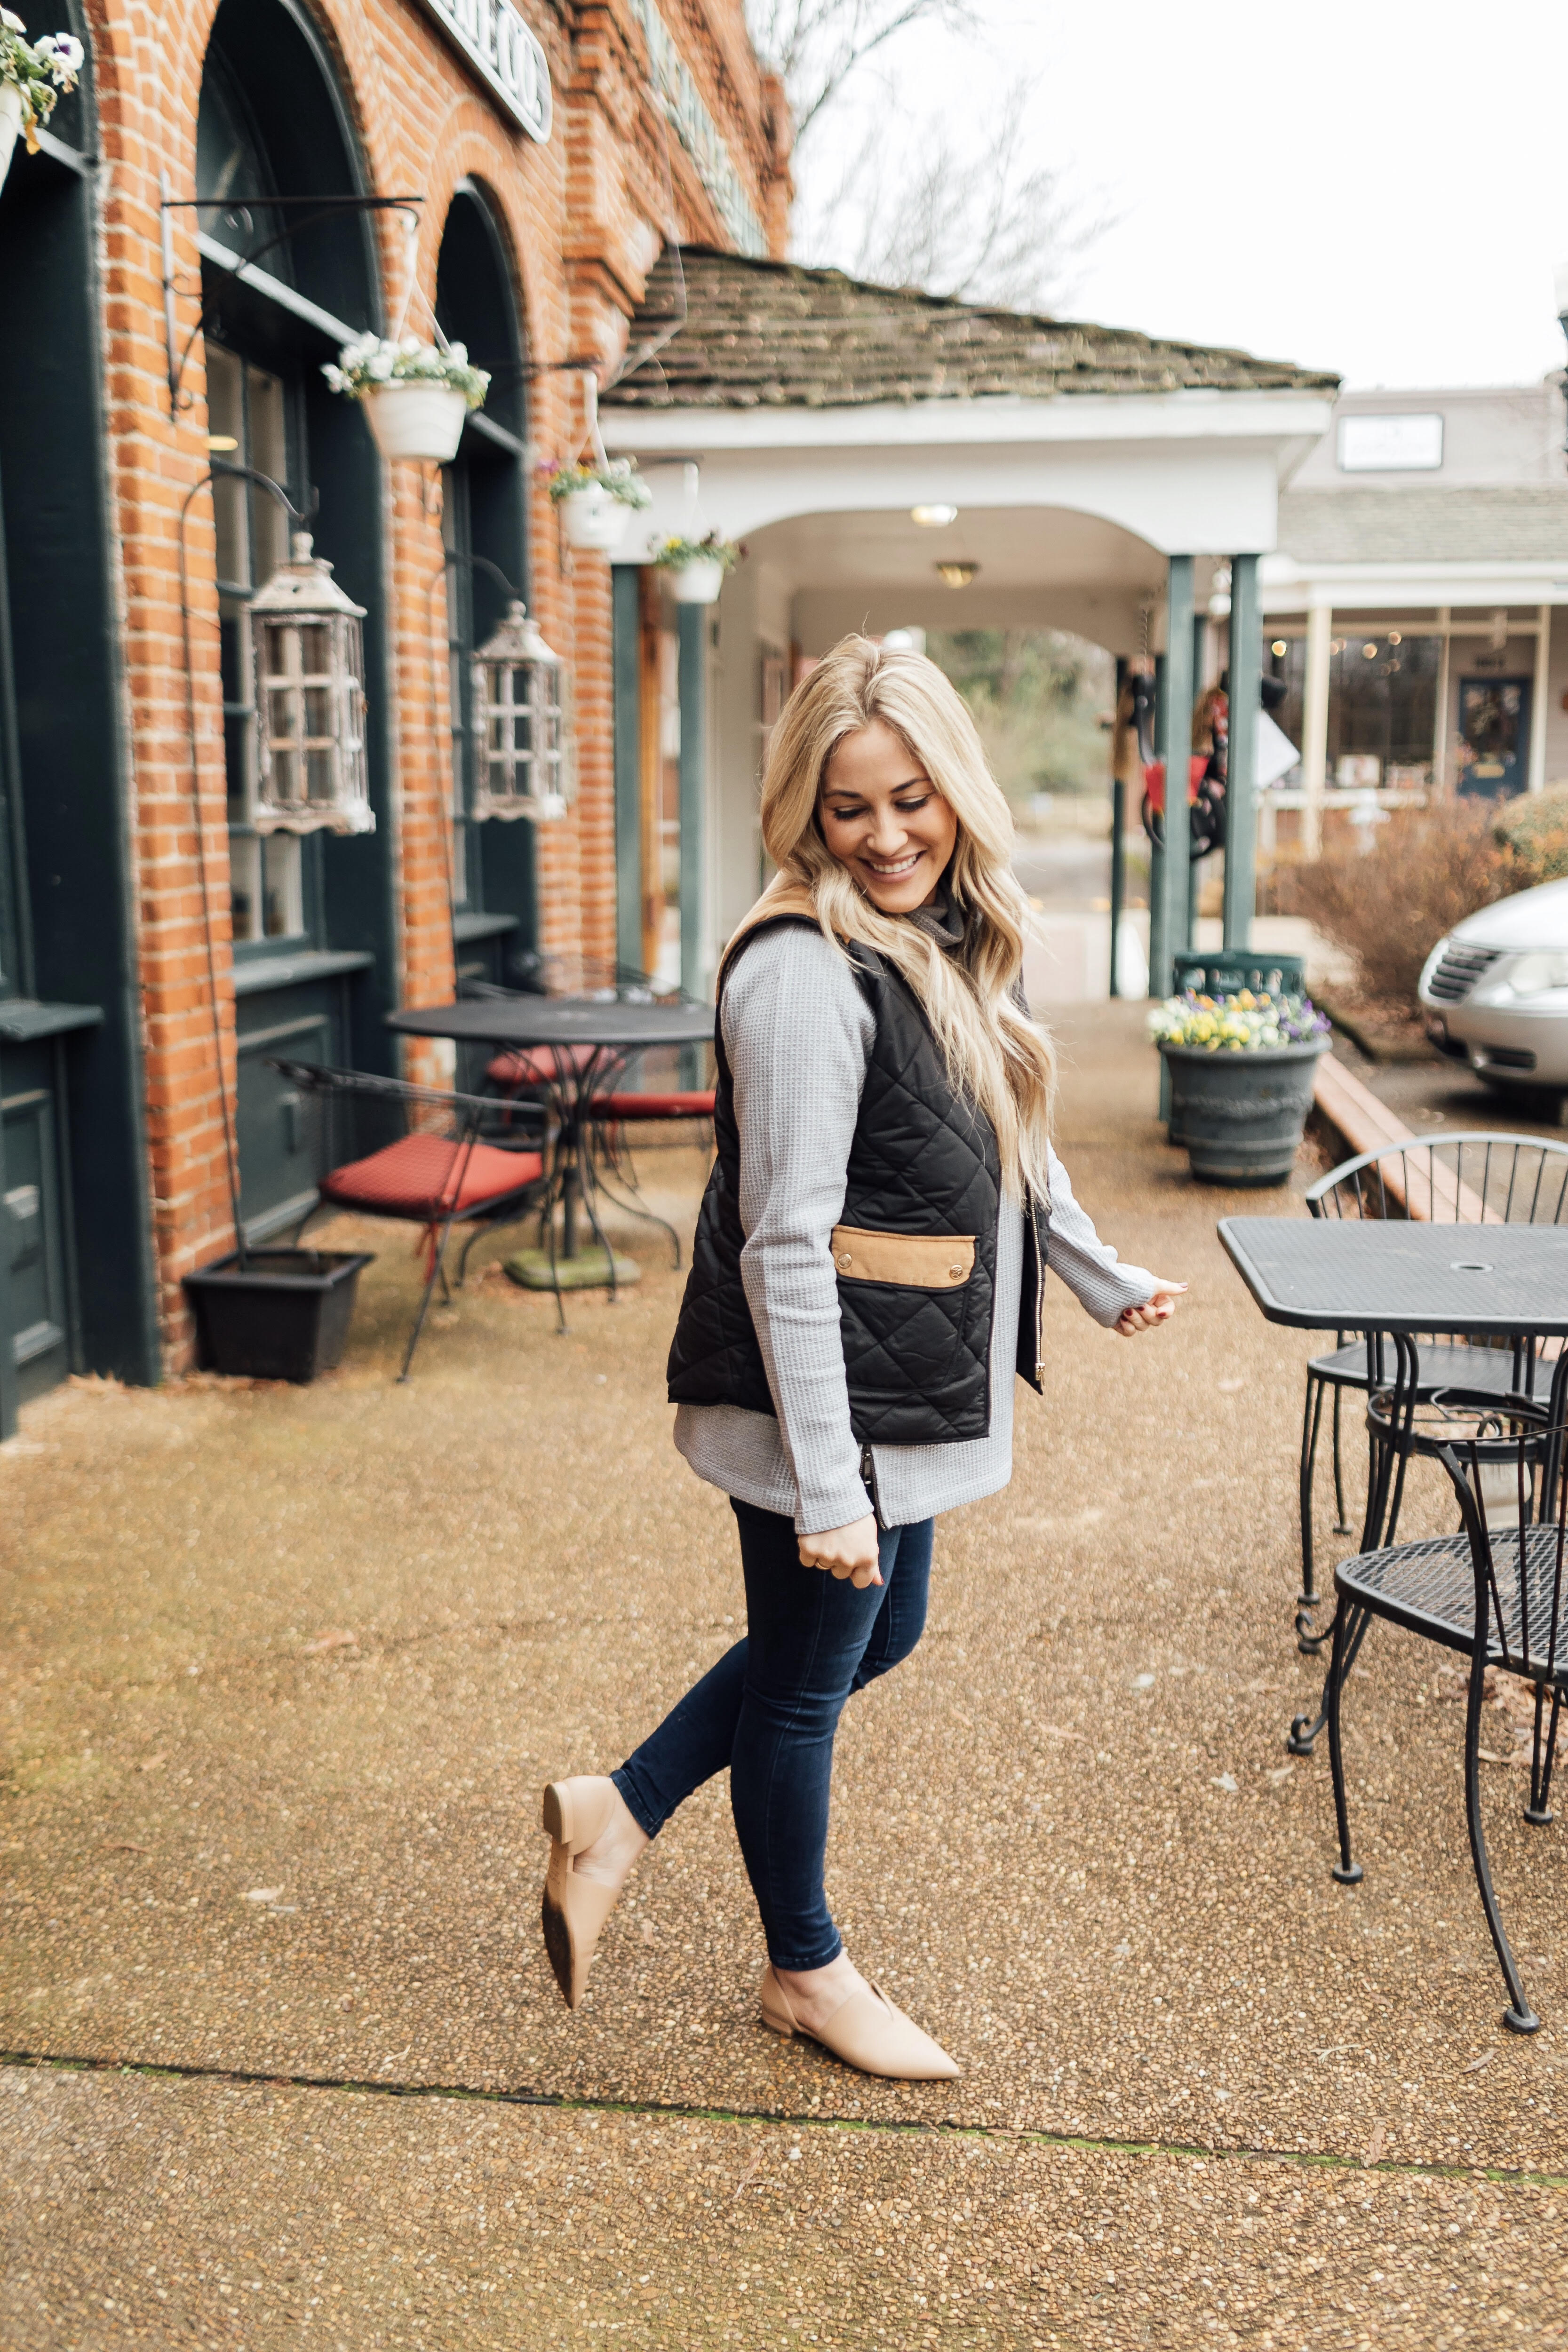 Must have LL Bean thermal top featured by top US fashion blog, Walking in Memphis in High Heels: image of a woman wearing an LL Bean MockNeck Thermal top, Lauren James vest, Joe’s Jeans skinny ankle jeans and Vince Camuto flats.